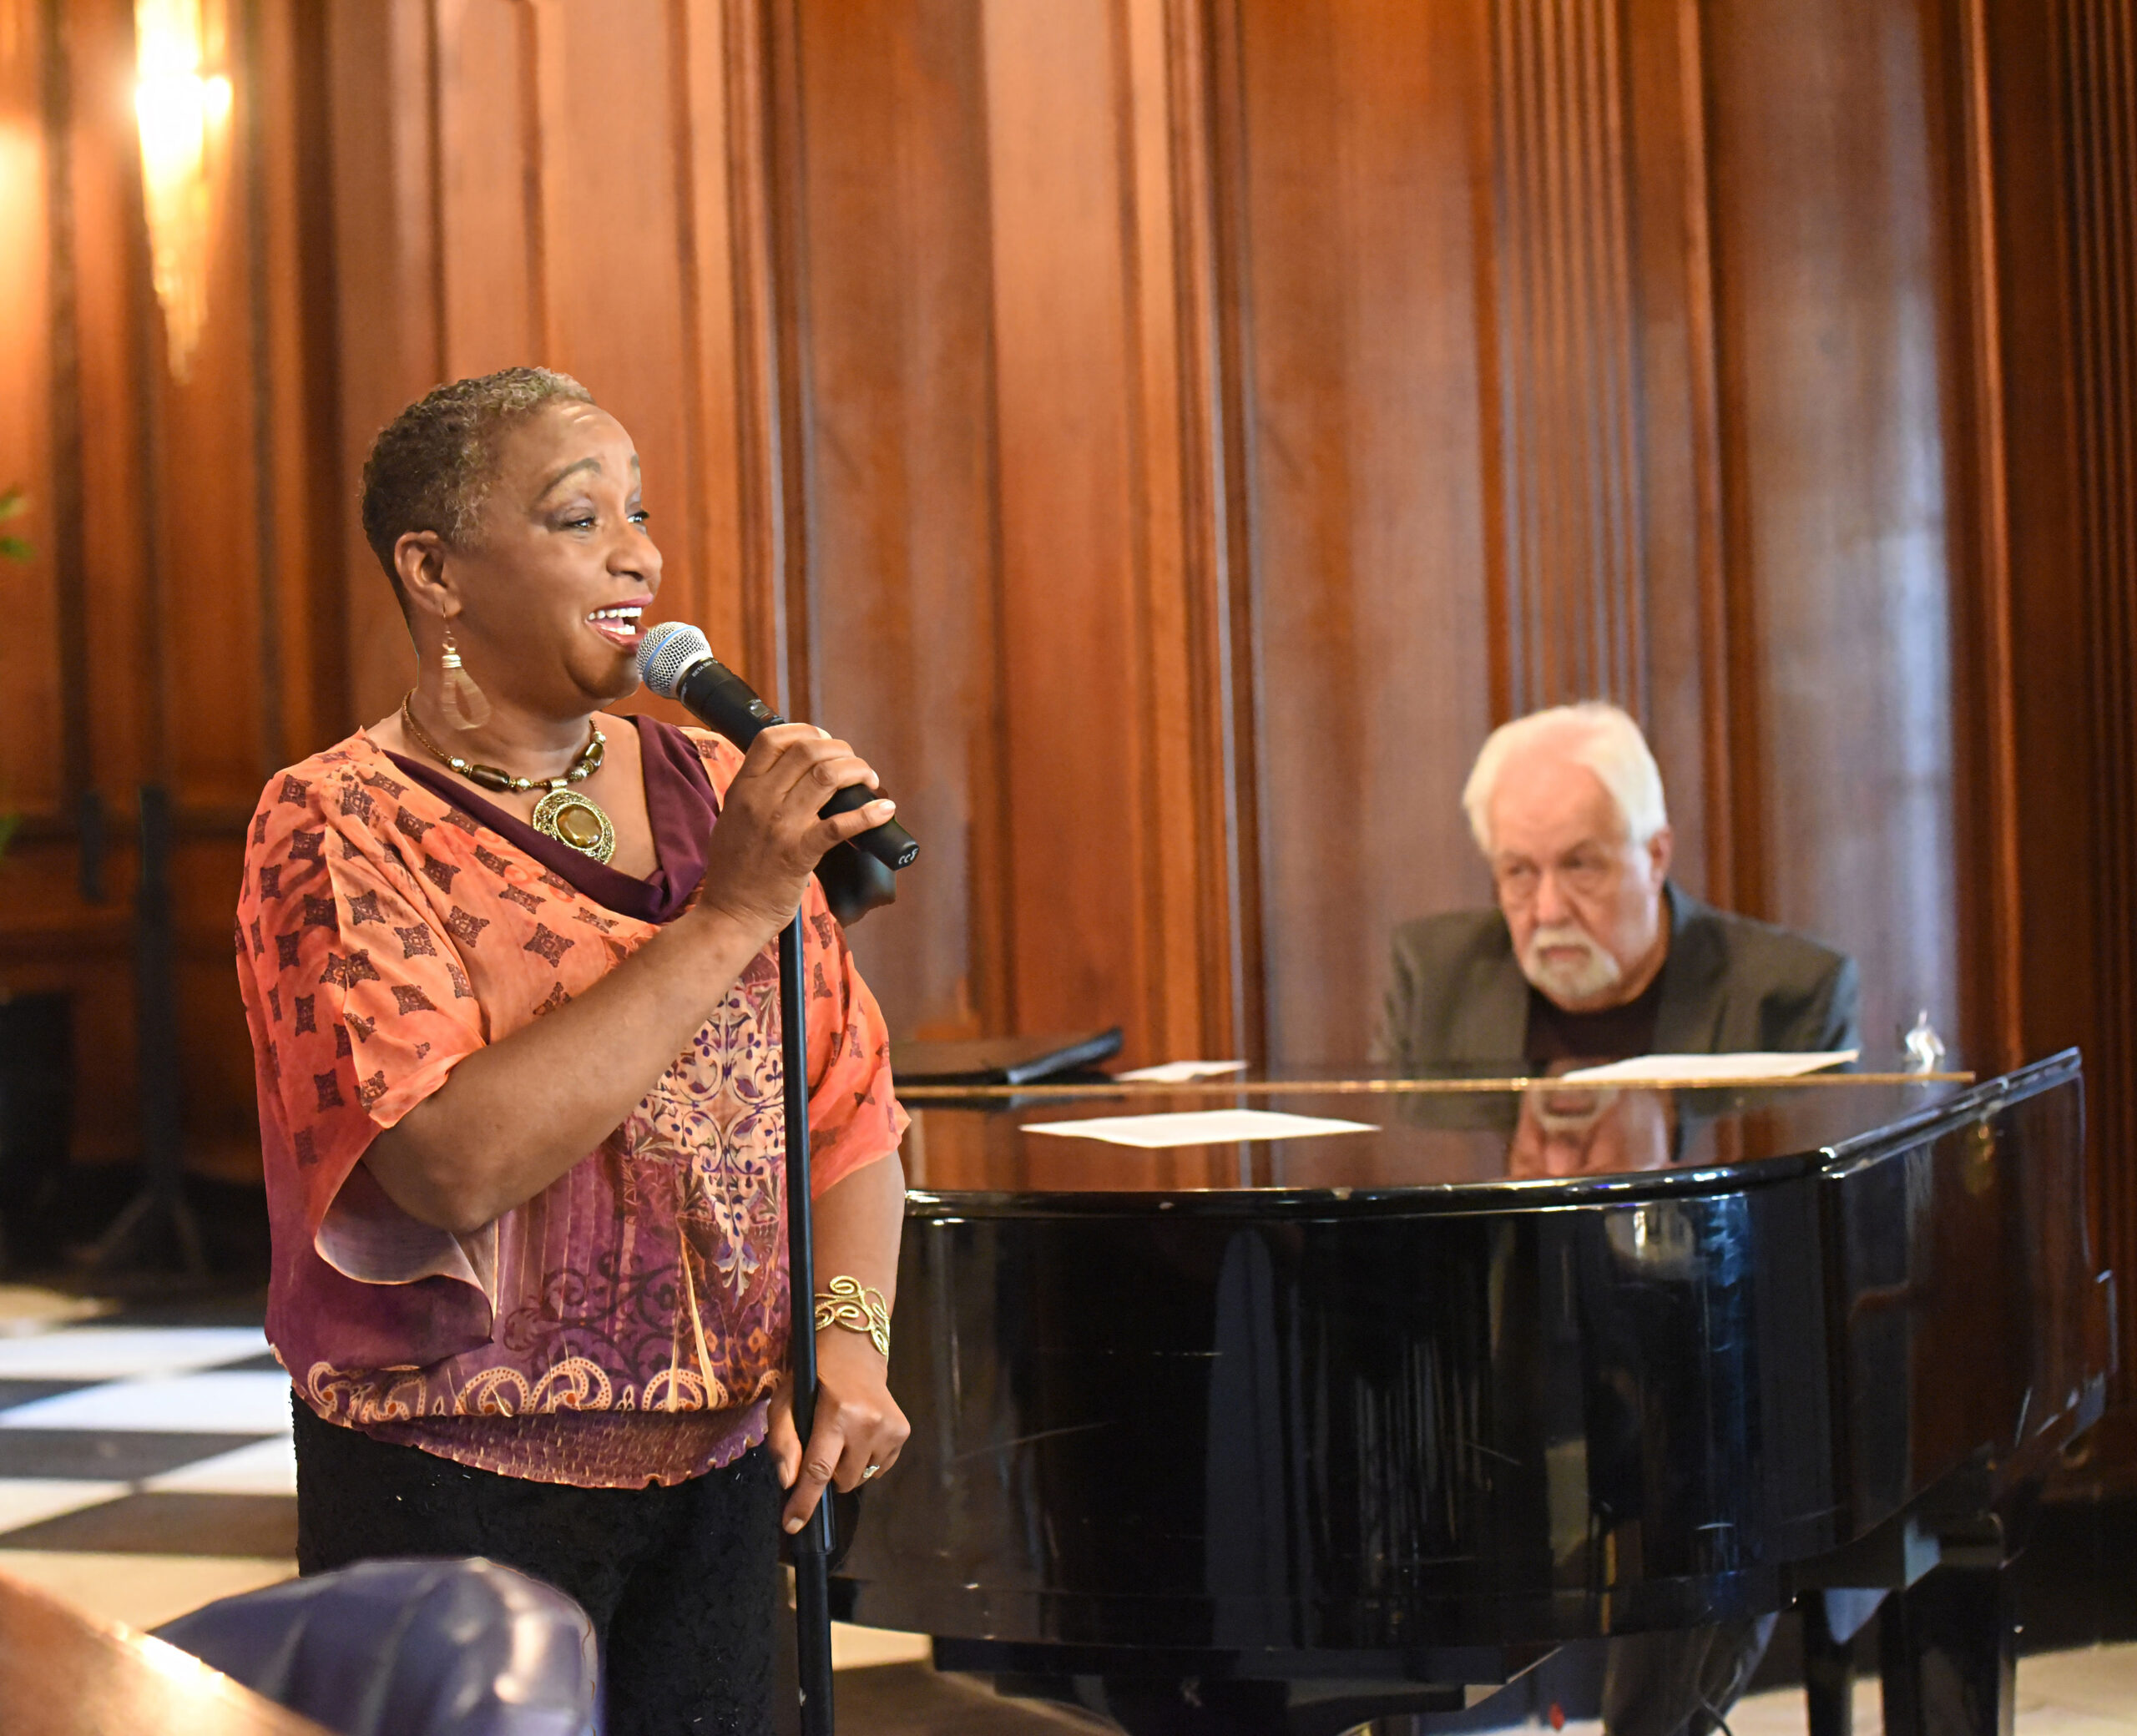 Connye Florance (singer) and Kevin Madill (pianist) performing together